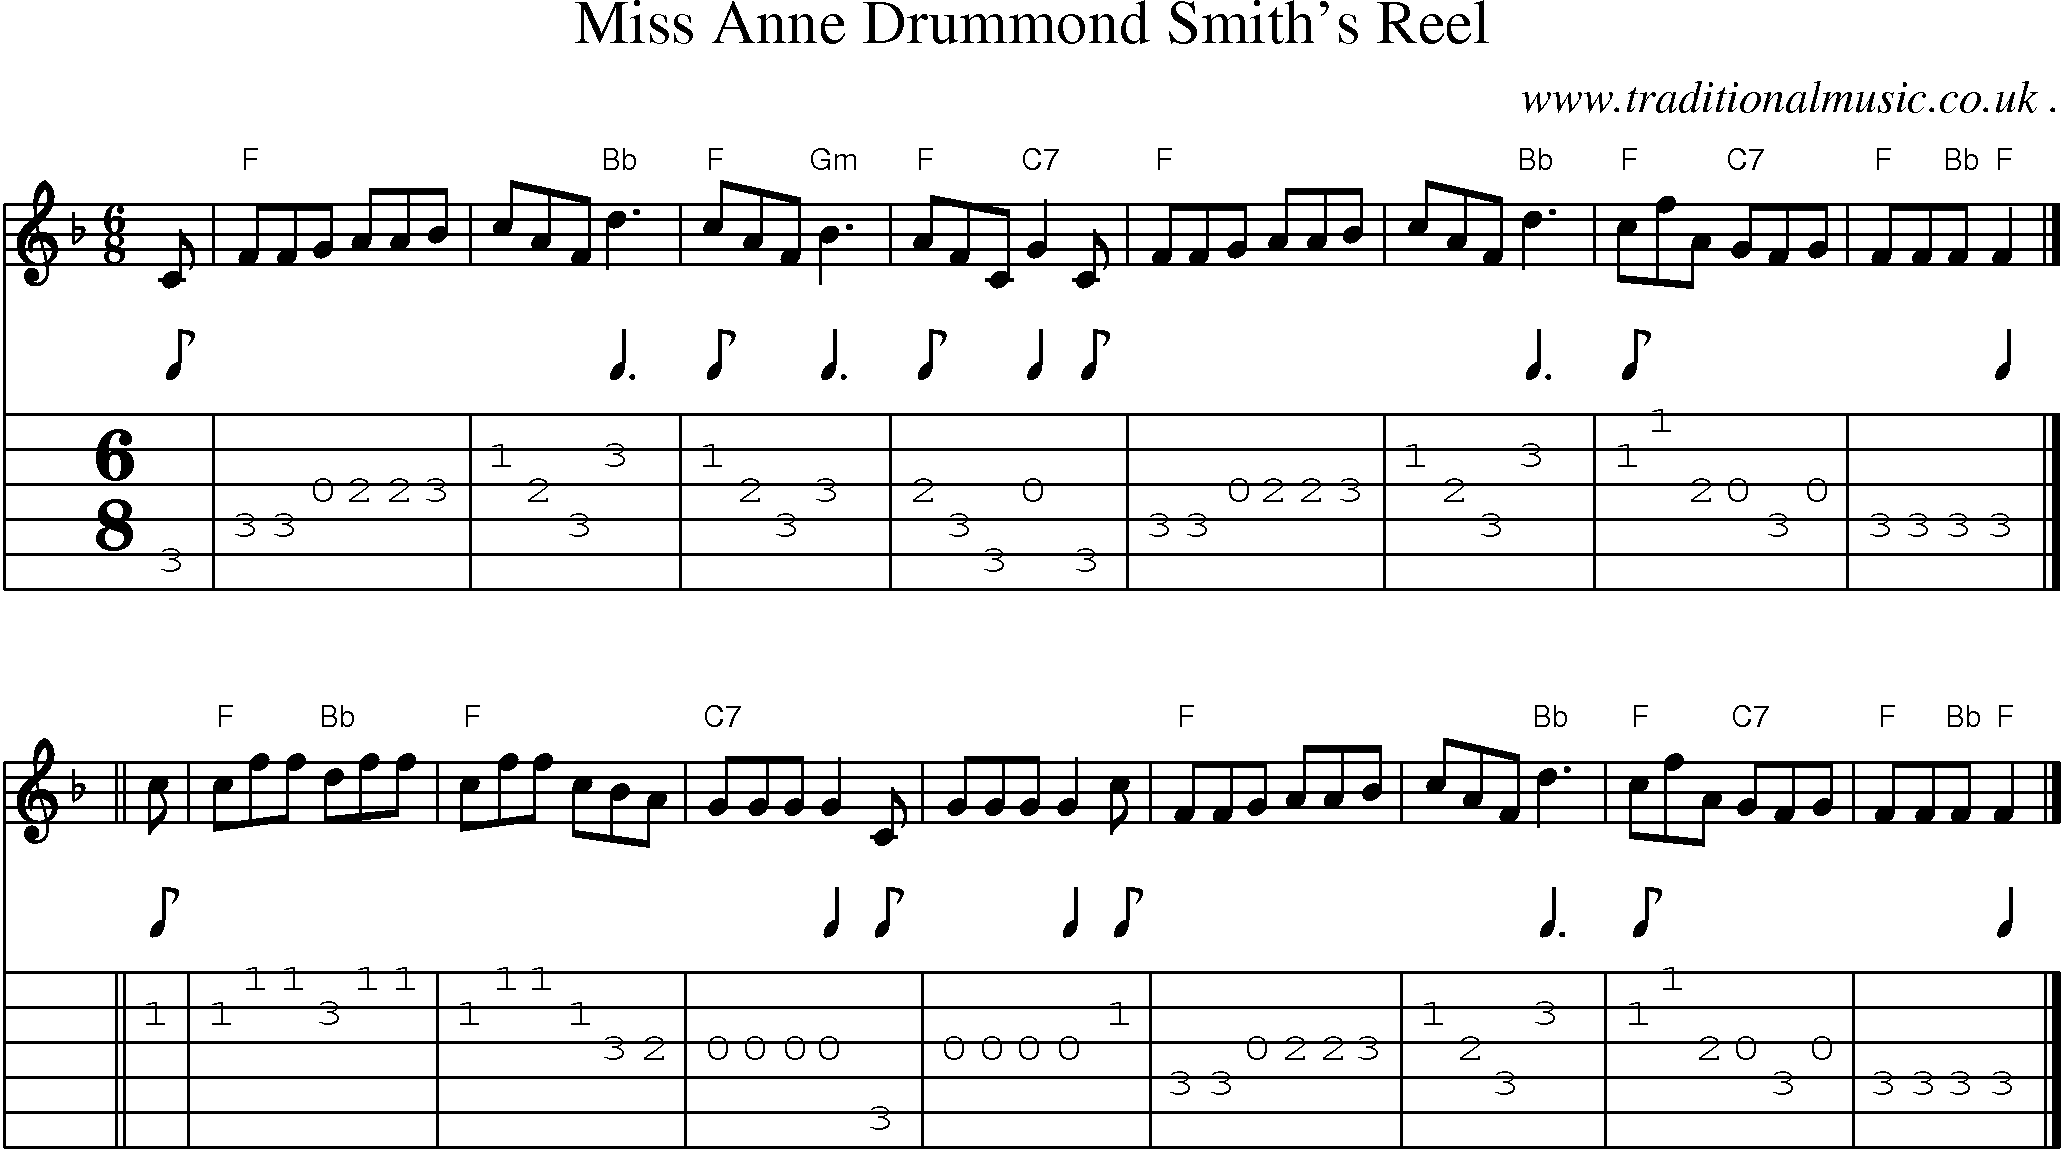 Sheet-music  score, Chords and Guitar Tabs for Miss Anne Drummond Smiths Reel